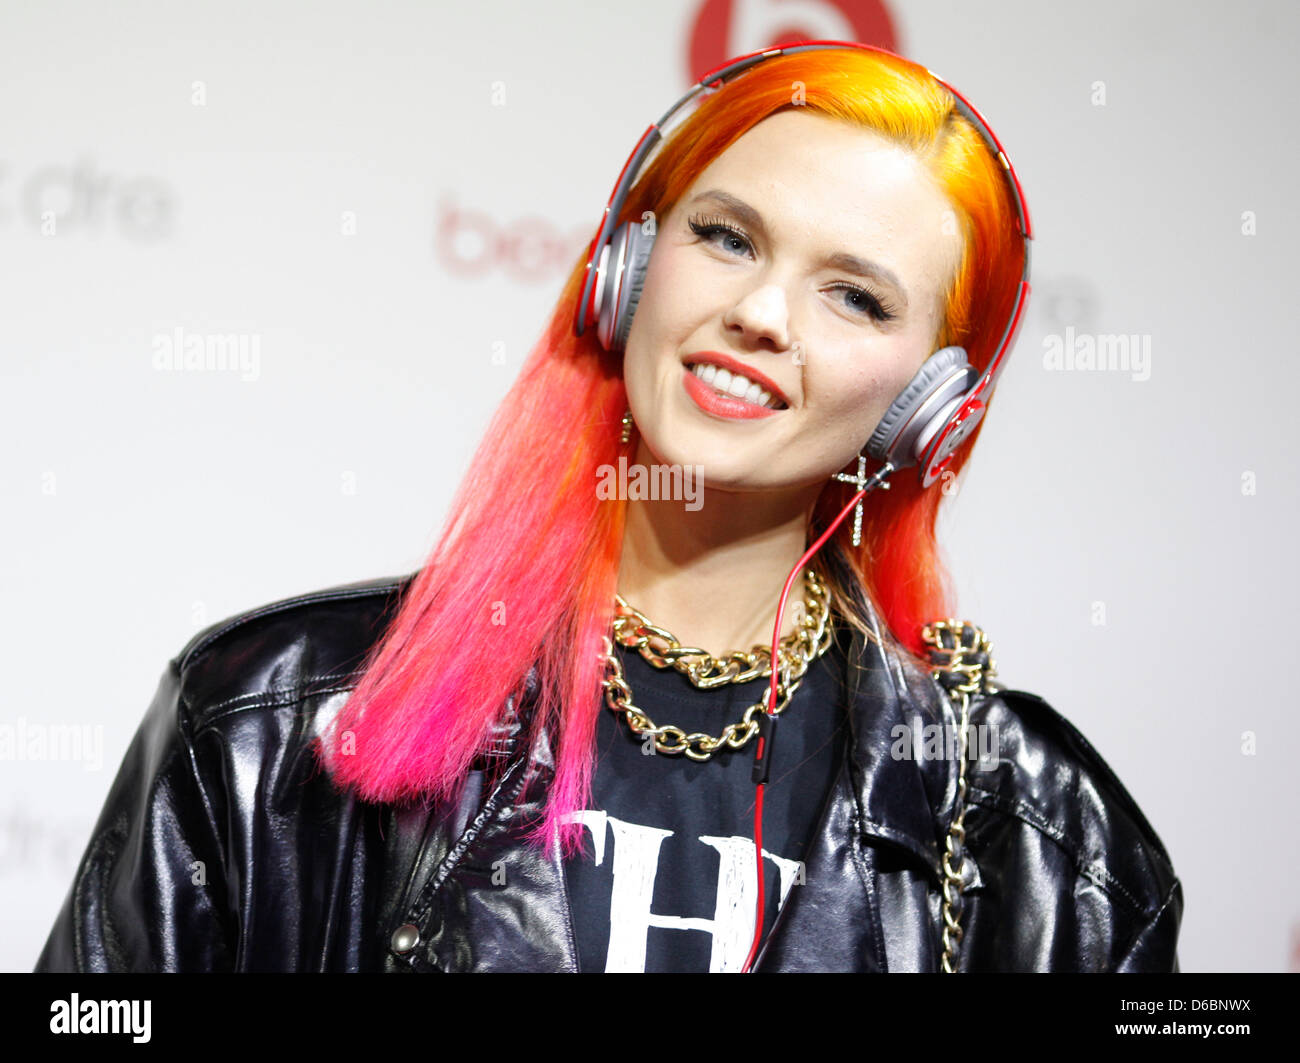 Model Bonnie Strange poses for pictures on the red carpet outside the nightclub 'Spindler und Klatt' in Berlin, Germany, 04 September 2012. The 'Beats Berlin Party' was sponsored by the 'Beats by Dr. Dre' headphone brand and attracted many celebrities. Photo: Florian Schuh Stock Photo